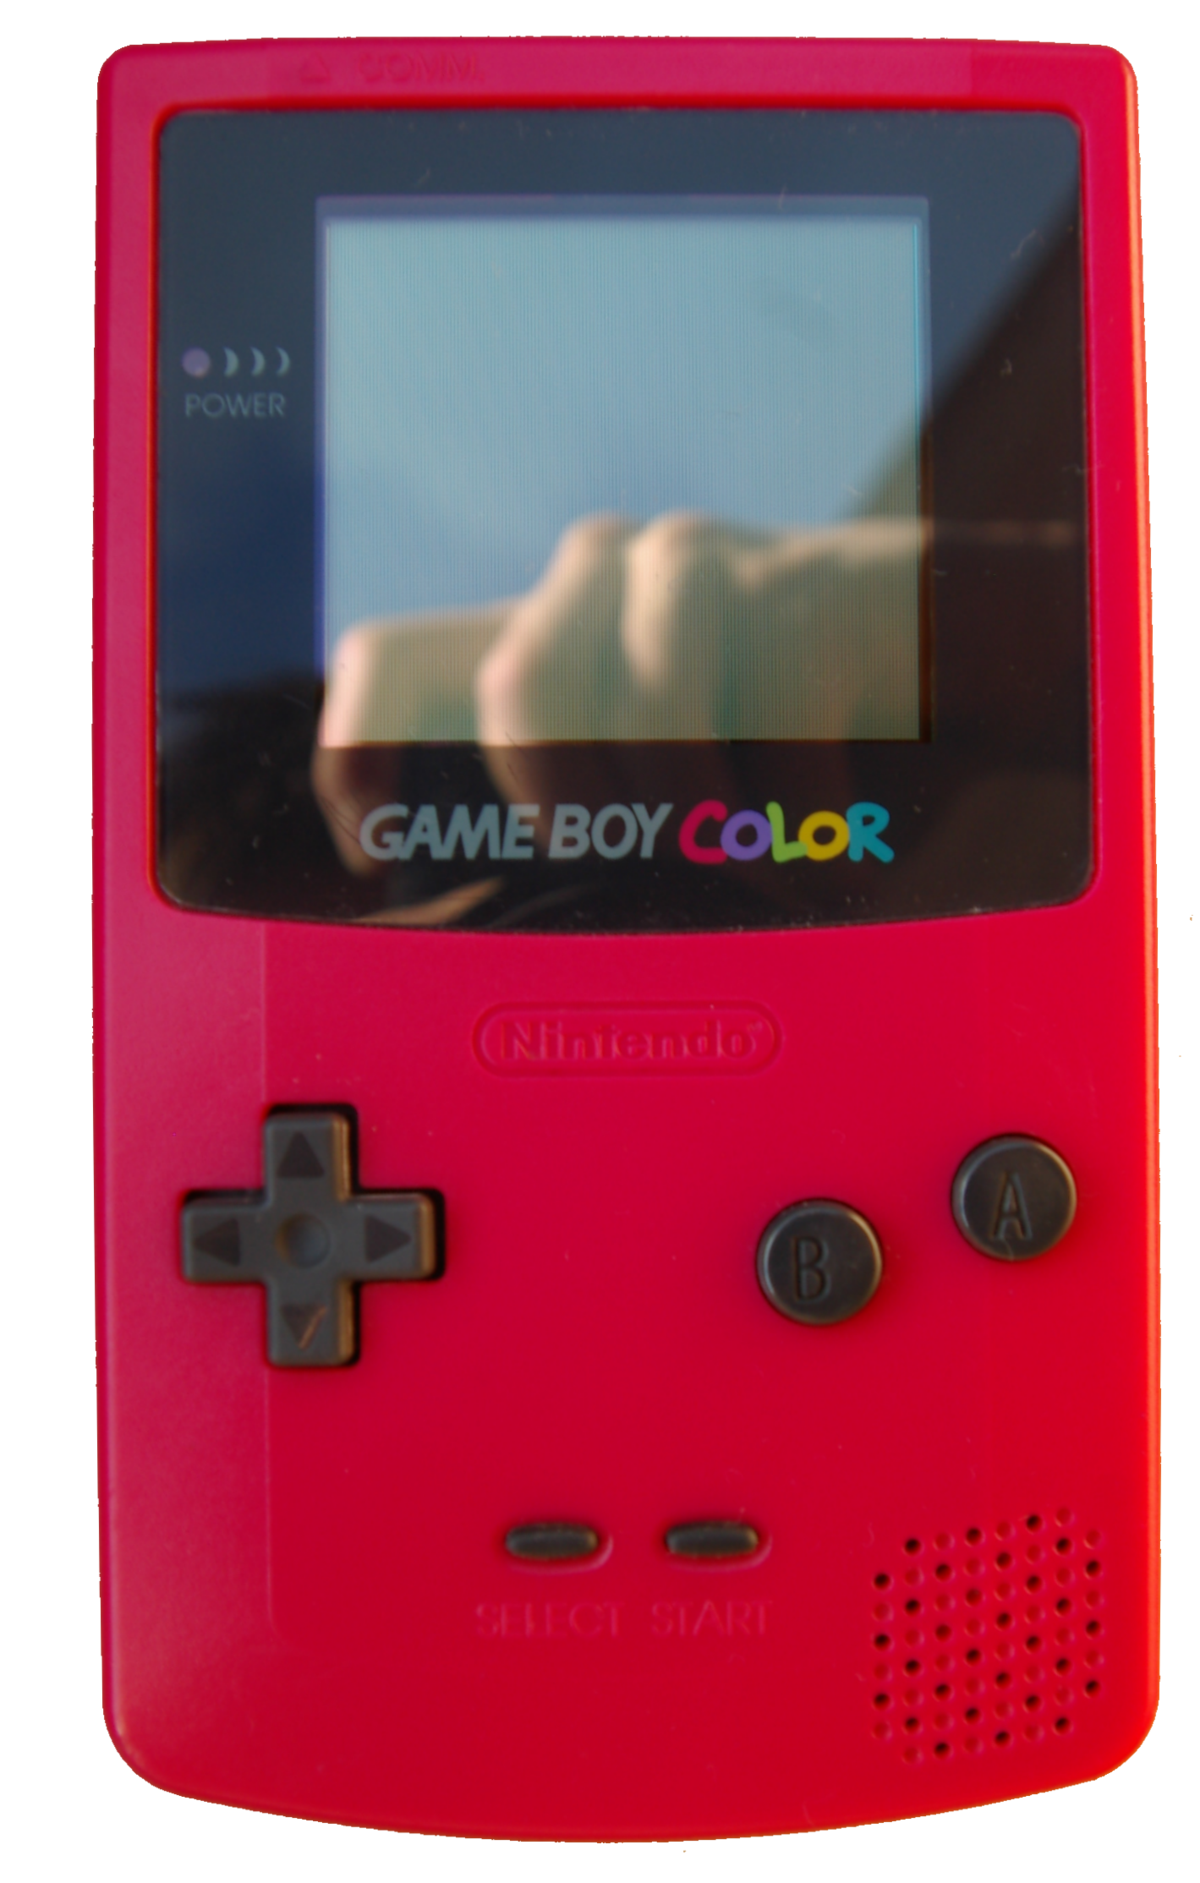 File:Game Boy Color.png - Wikipedia